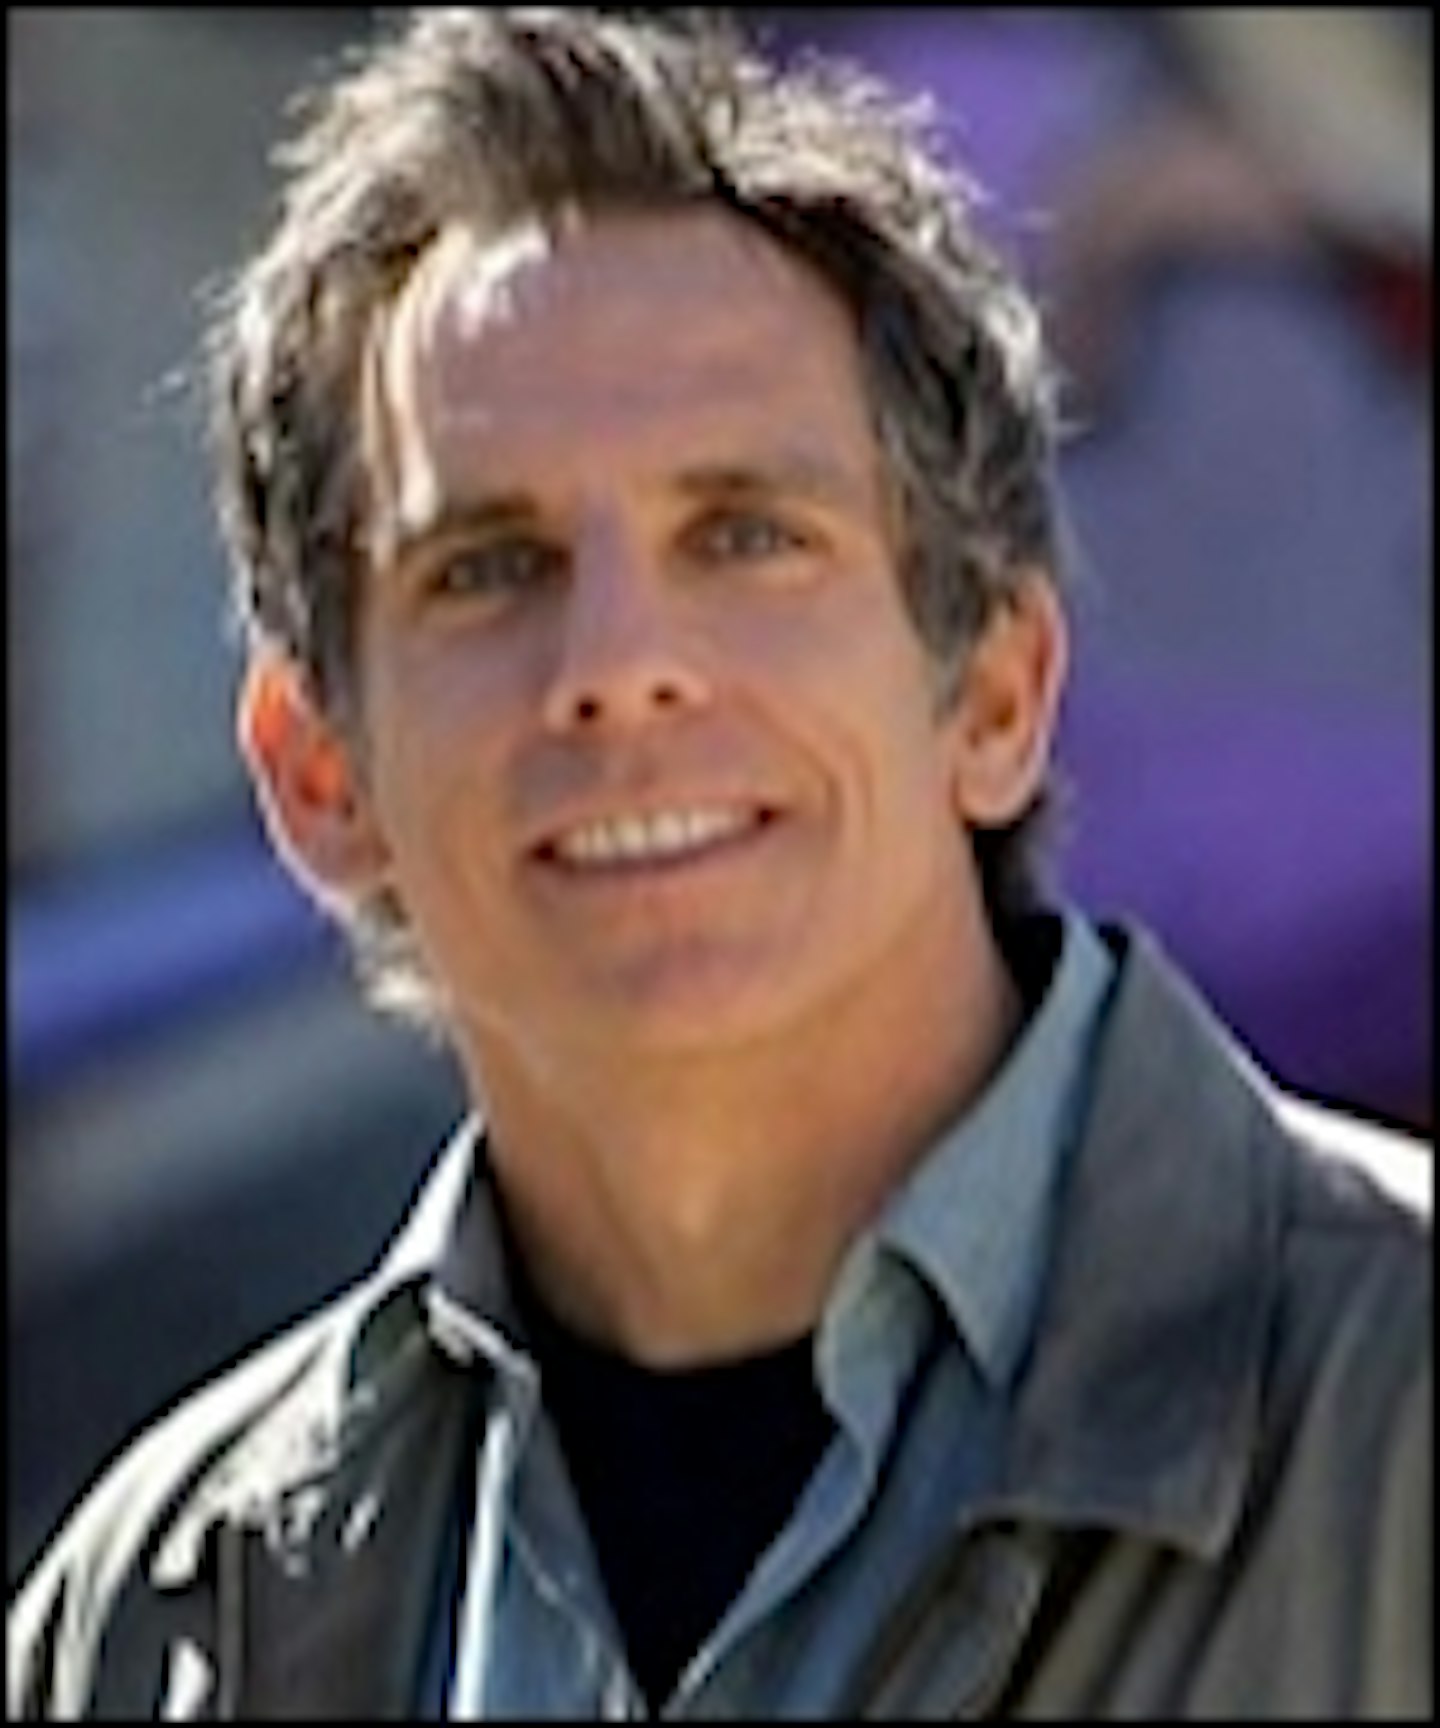 Trailer For Noah Baumbach's While We're Young